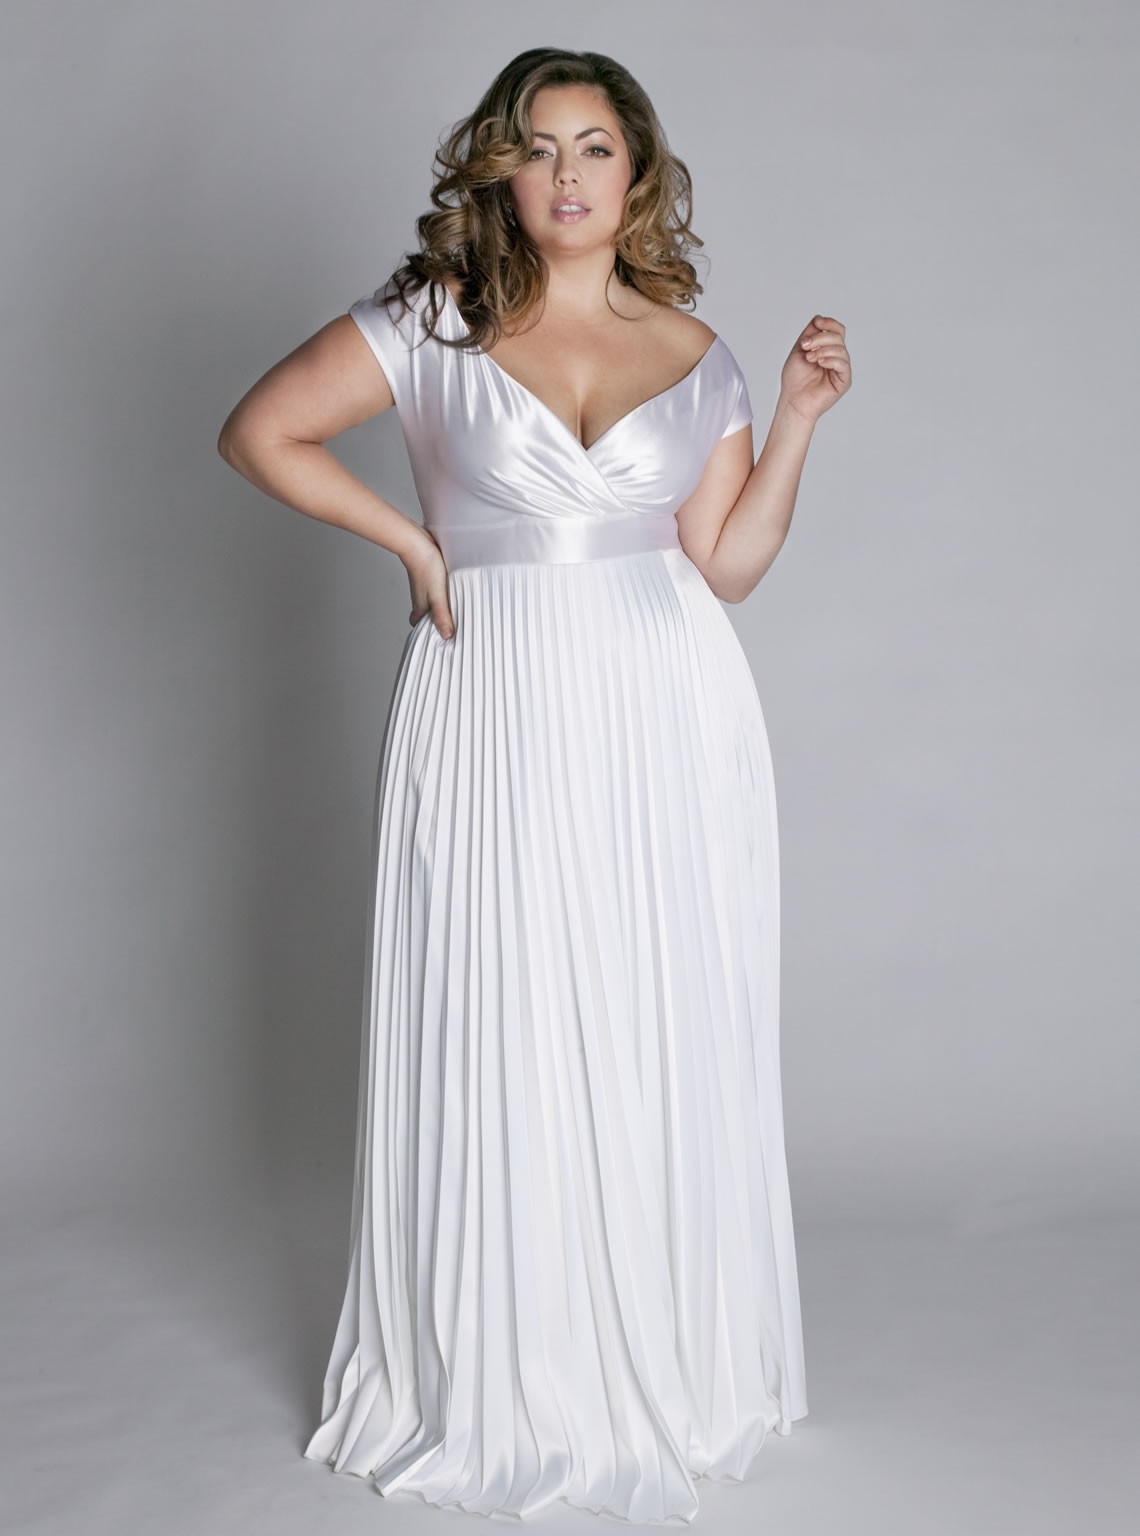 15 Plus Size Wedding Dresses To Make You Look Like Queen MagMent